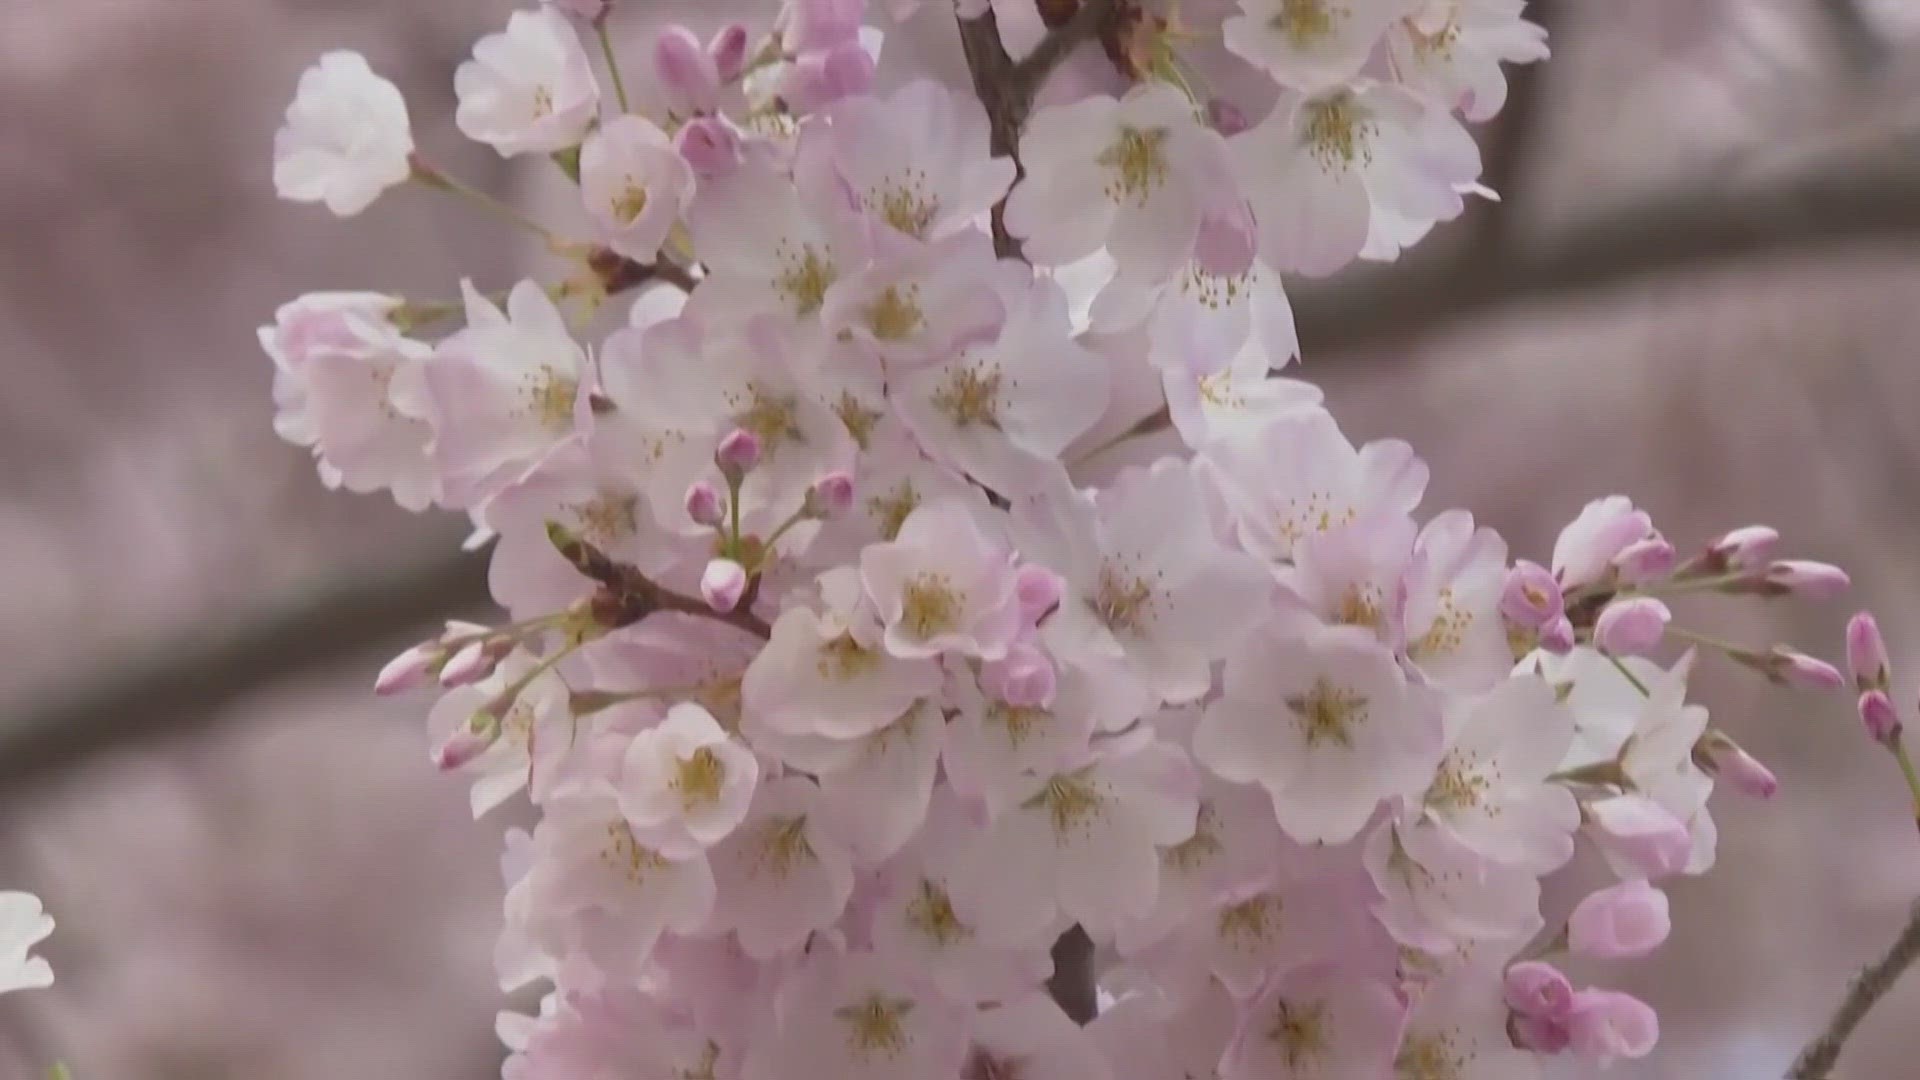 Cherry Blossoms have started to bloom across the U.S. and some people are getting creative with the nature.